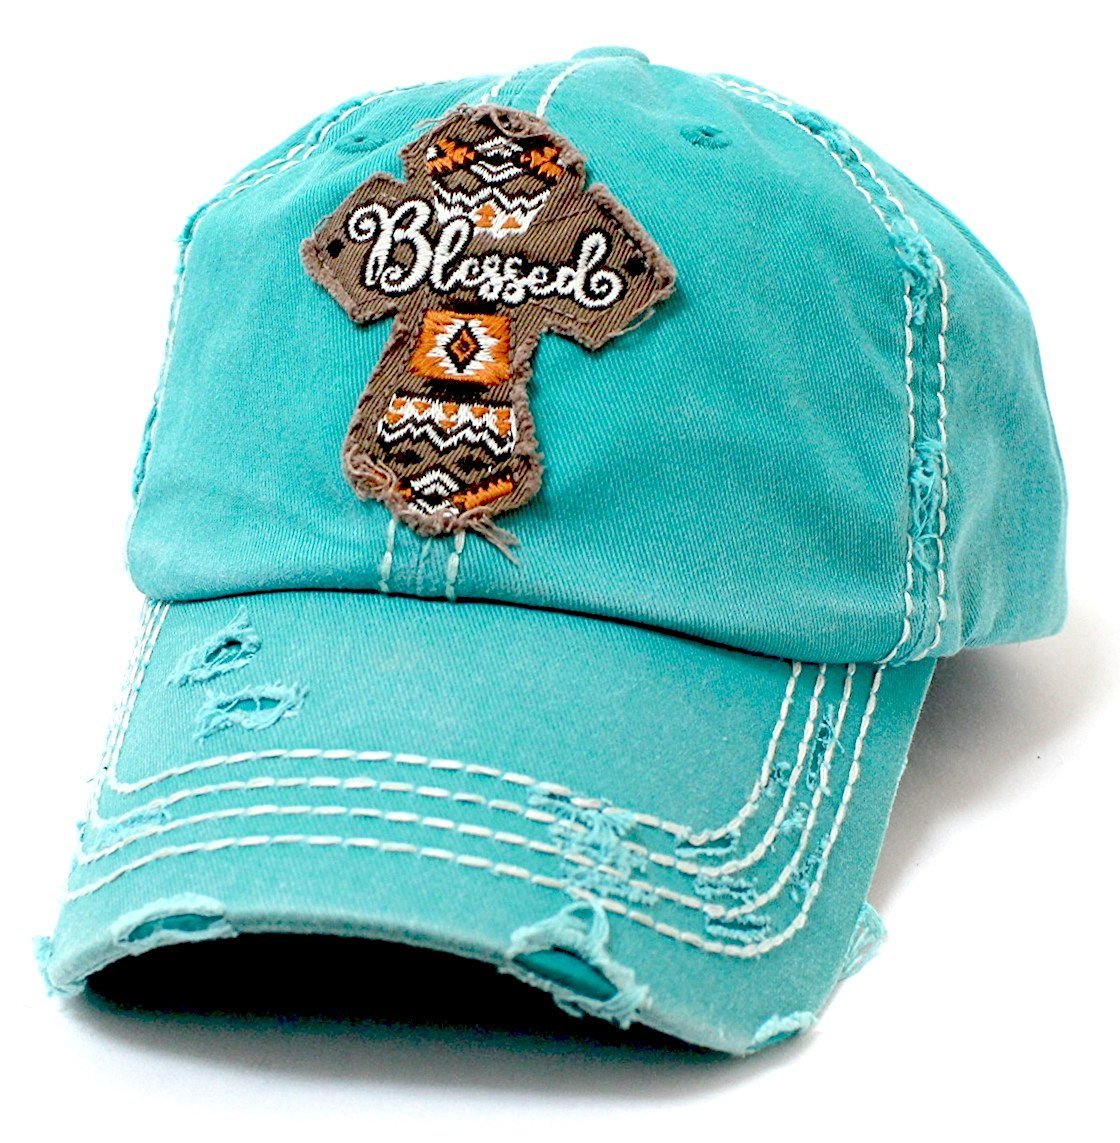 CAPS 'N VINTAGE Blessed Cross Patch Embroidery Vintage Baseball Hat - Caps 'N Vintage 